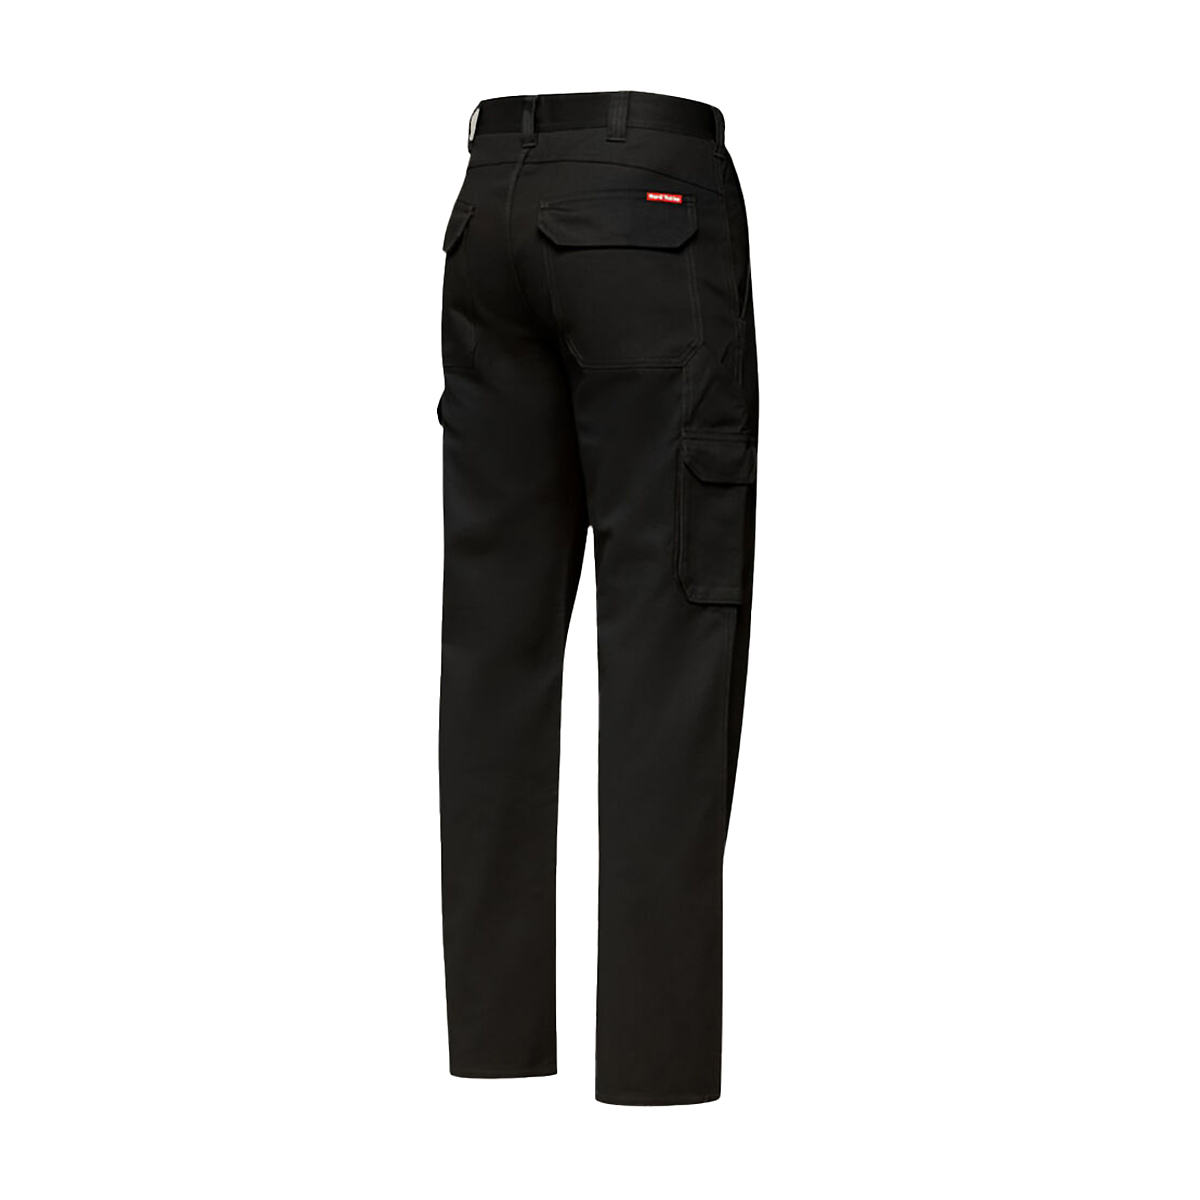 WORKIT WORKWEAR LIGHTWEIGHT COTTON DRILL TAPED CARGO PANT - LADIES